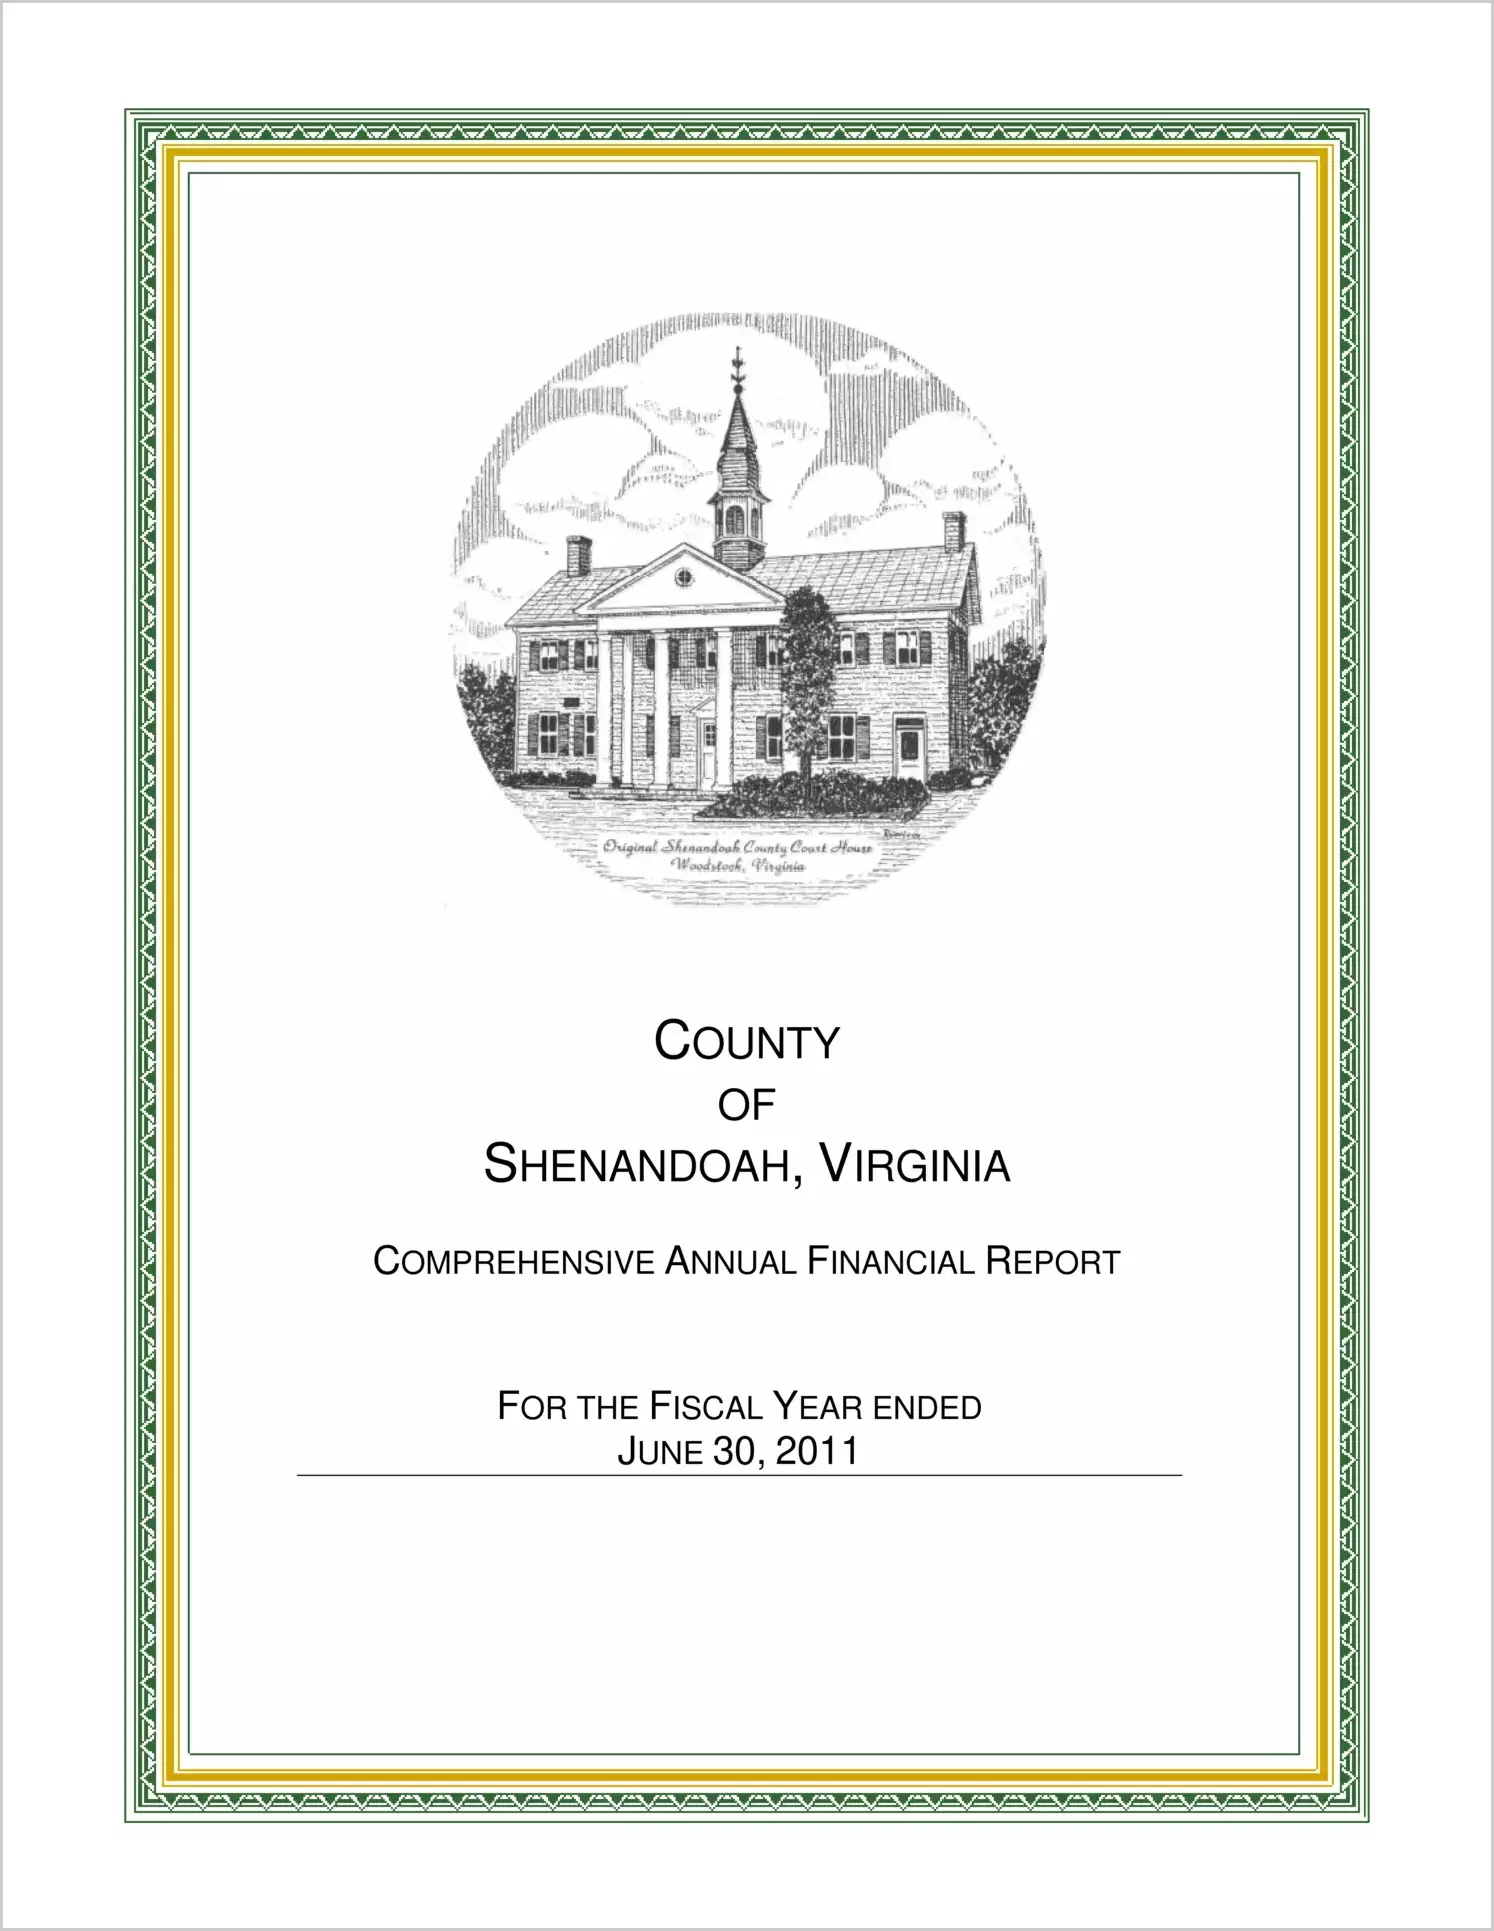 2011 Annual Financial Report for County of Shenandoah